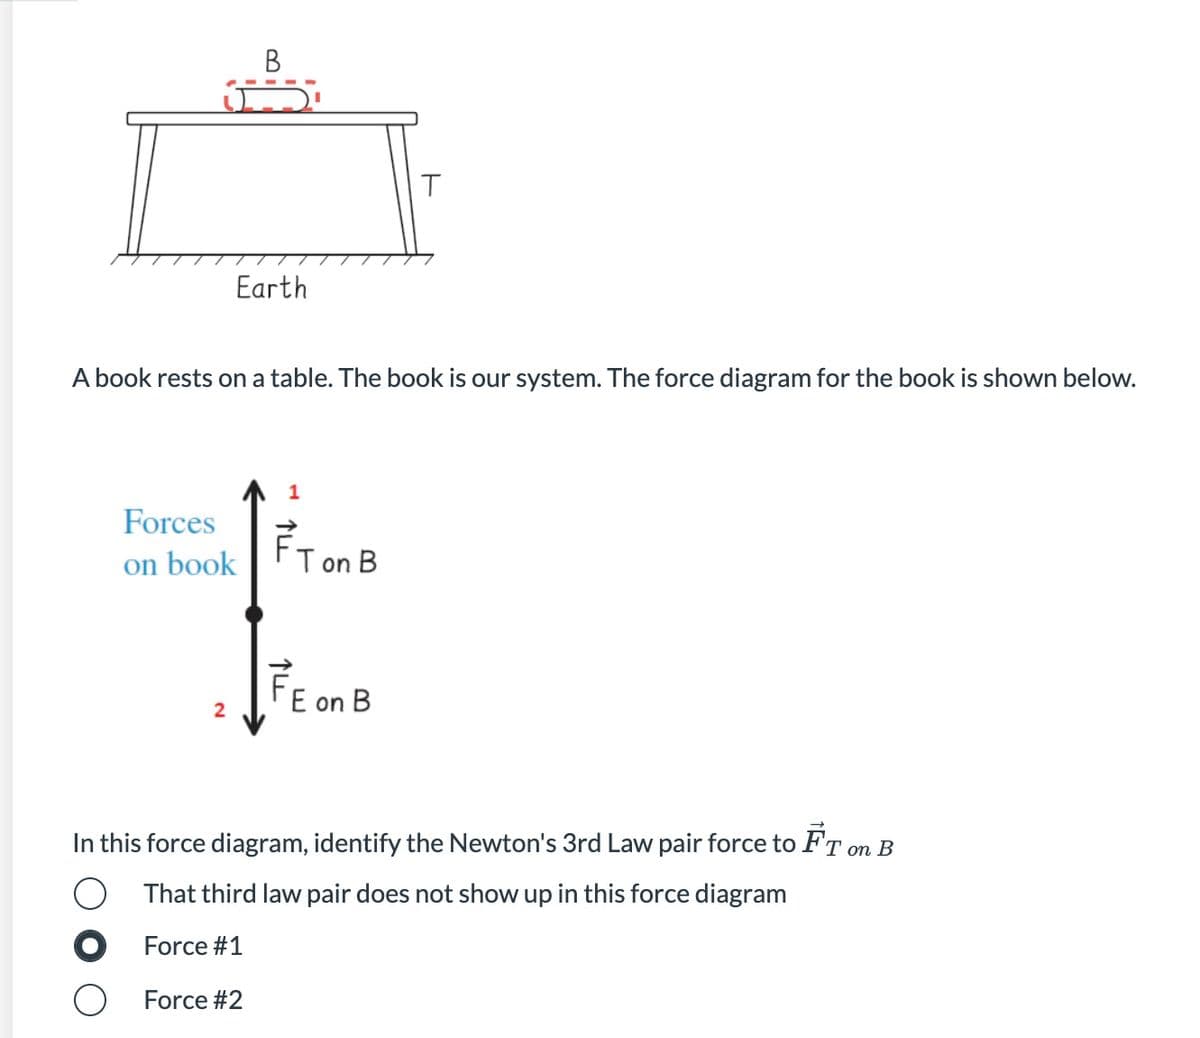 В
Earth
A book rests on a table. The book is our system. The force diagram for the book is shown below.
1
Forces
on book
Ton B
FE on B
In this force diagram, identify the Newton's 3rd Law pair force to FT on B
That third law pair does not show up in this force diagram
Force #1
Force #2
